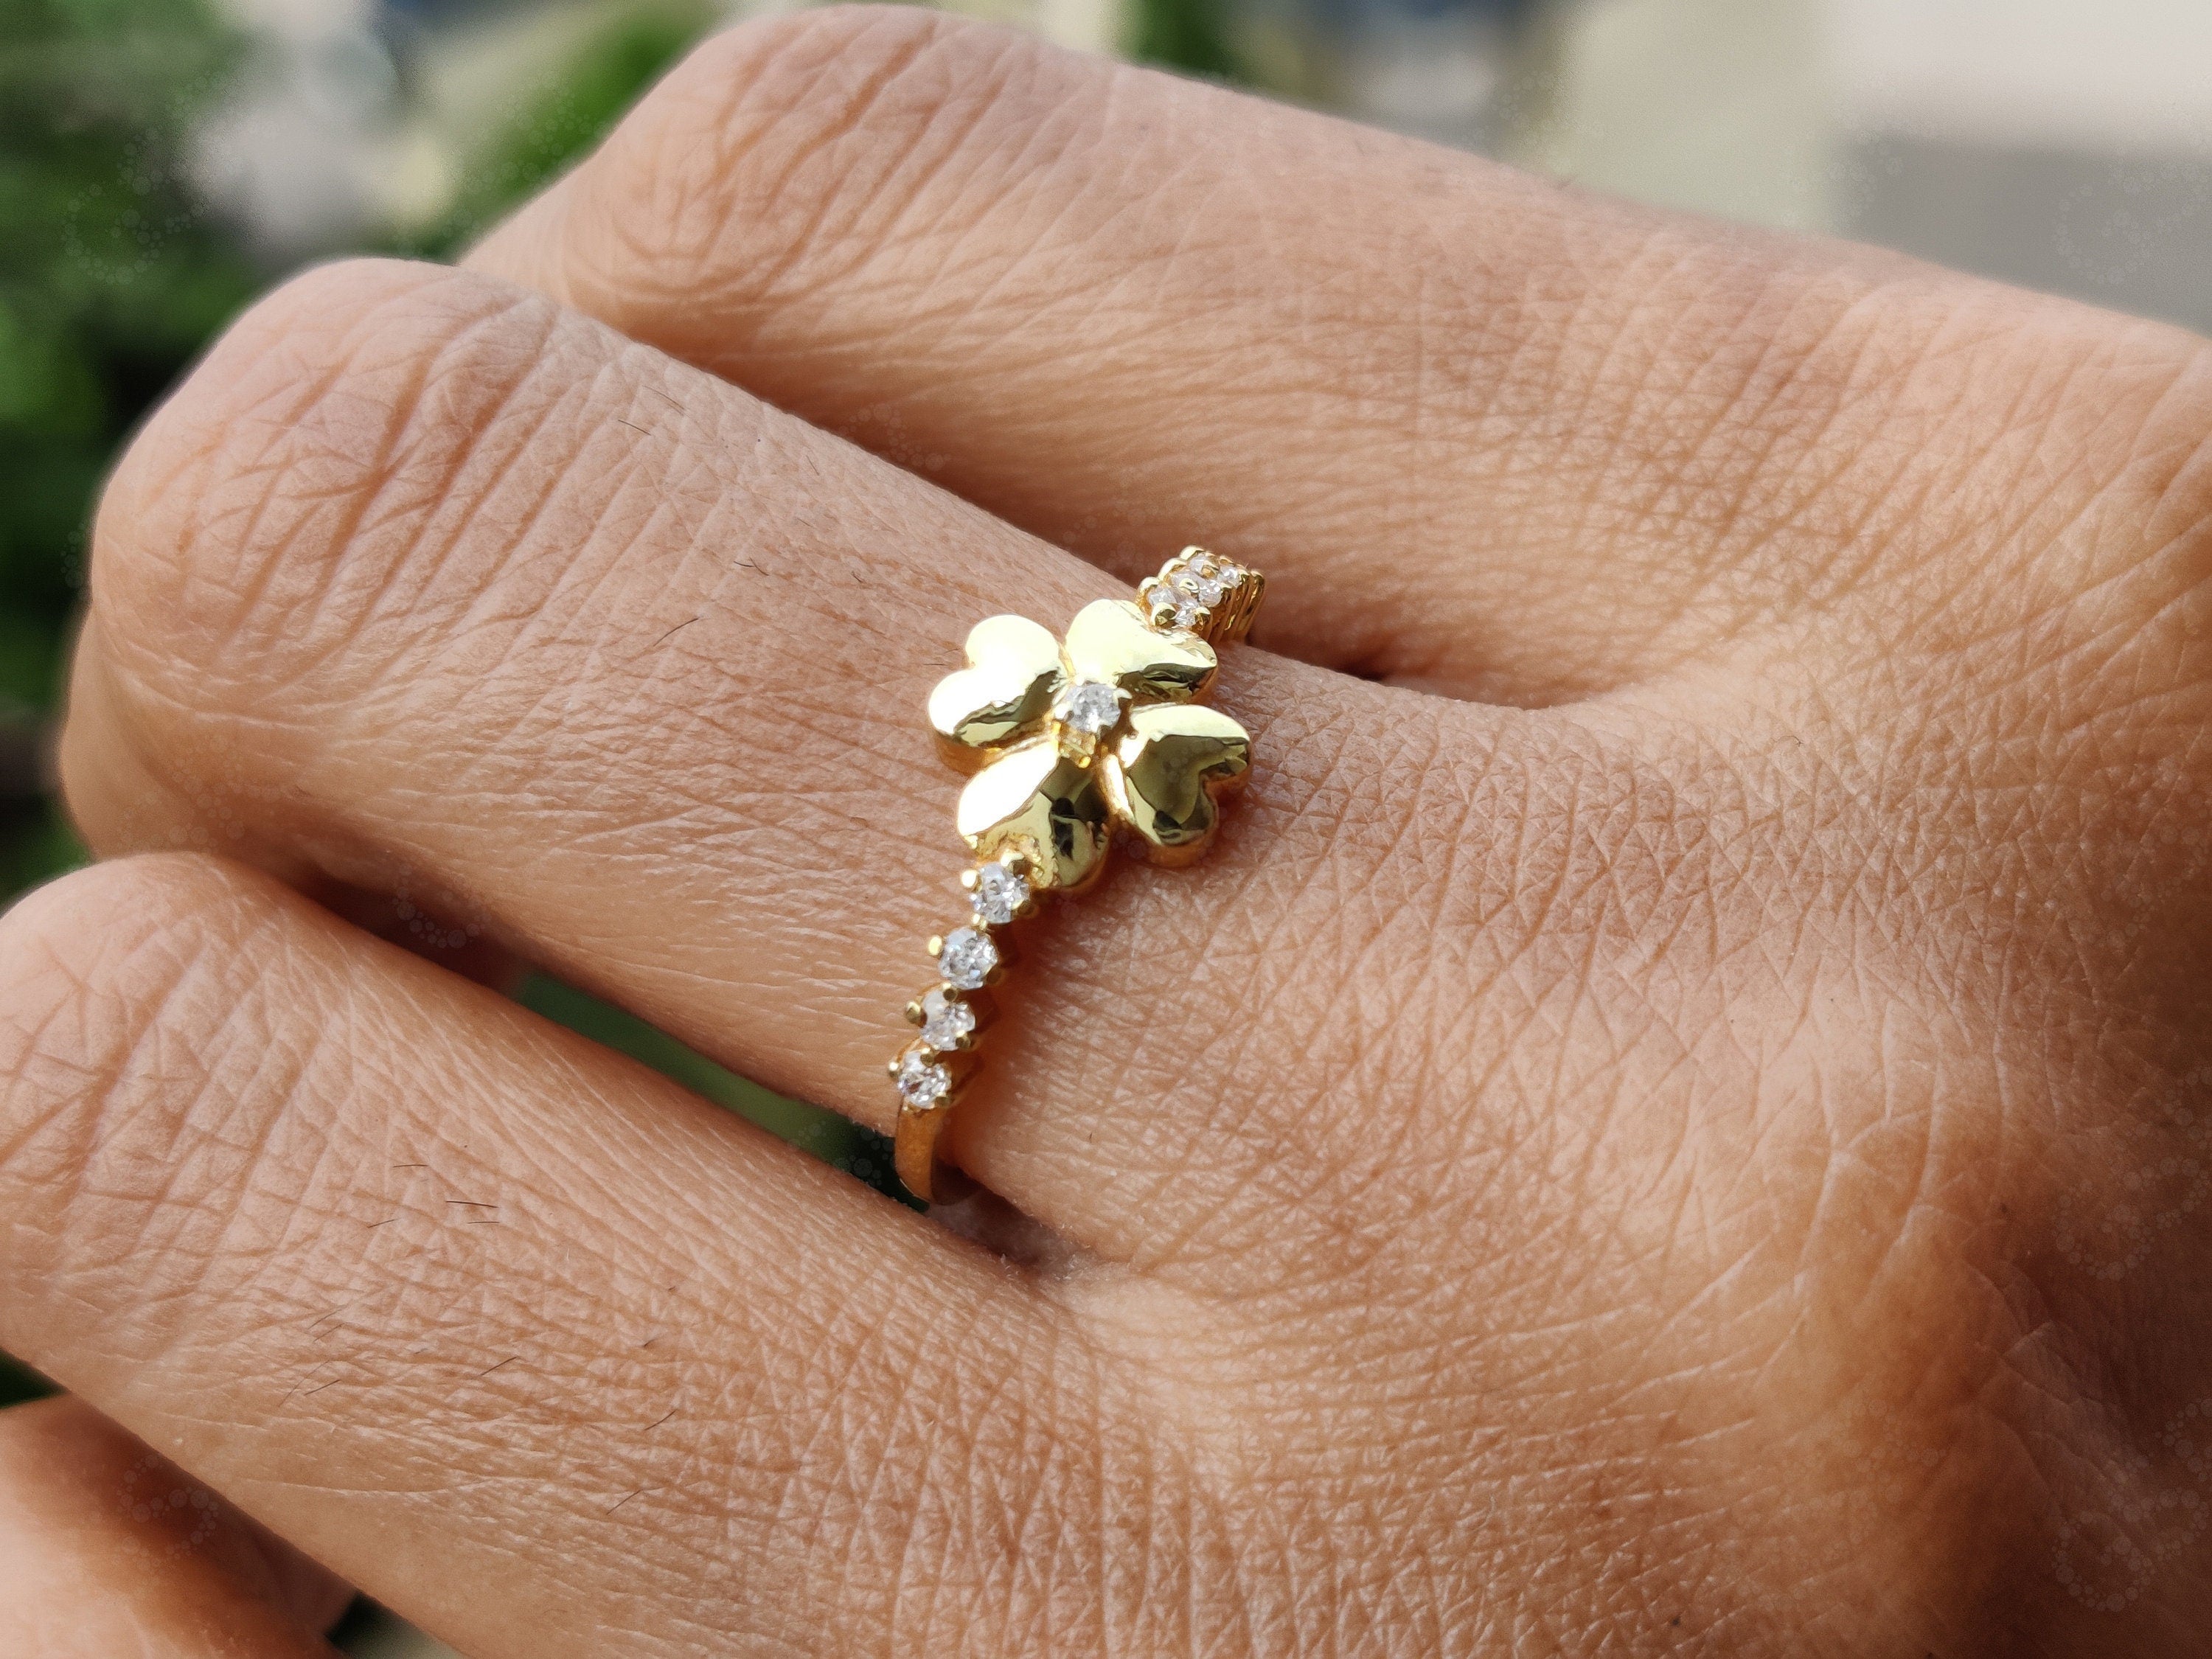 Nature-Inspired Floral Moissanite Ring in Silver and Gold - Dainty Stackable Ring, Ideal for Weddings, Promises, and Anniversaries